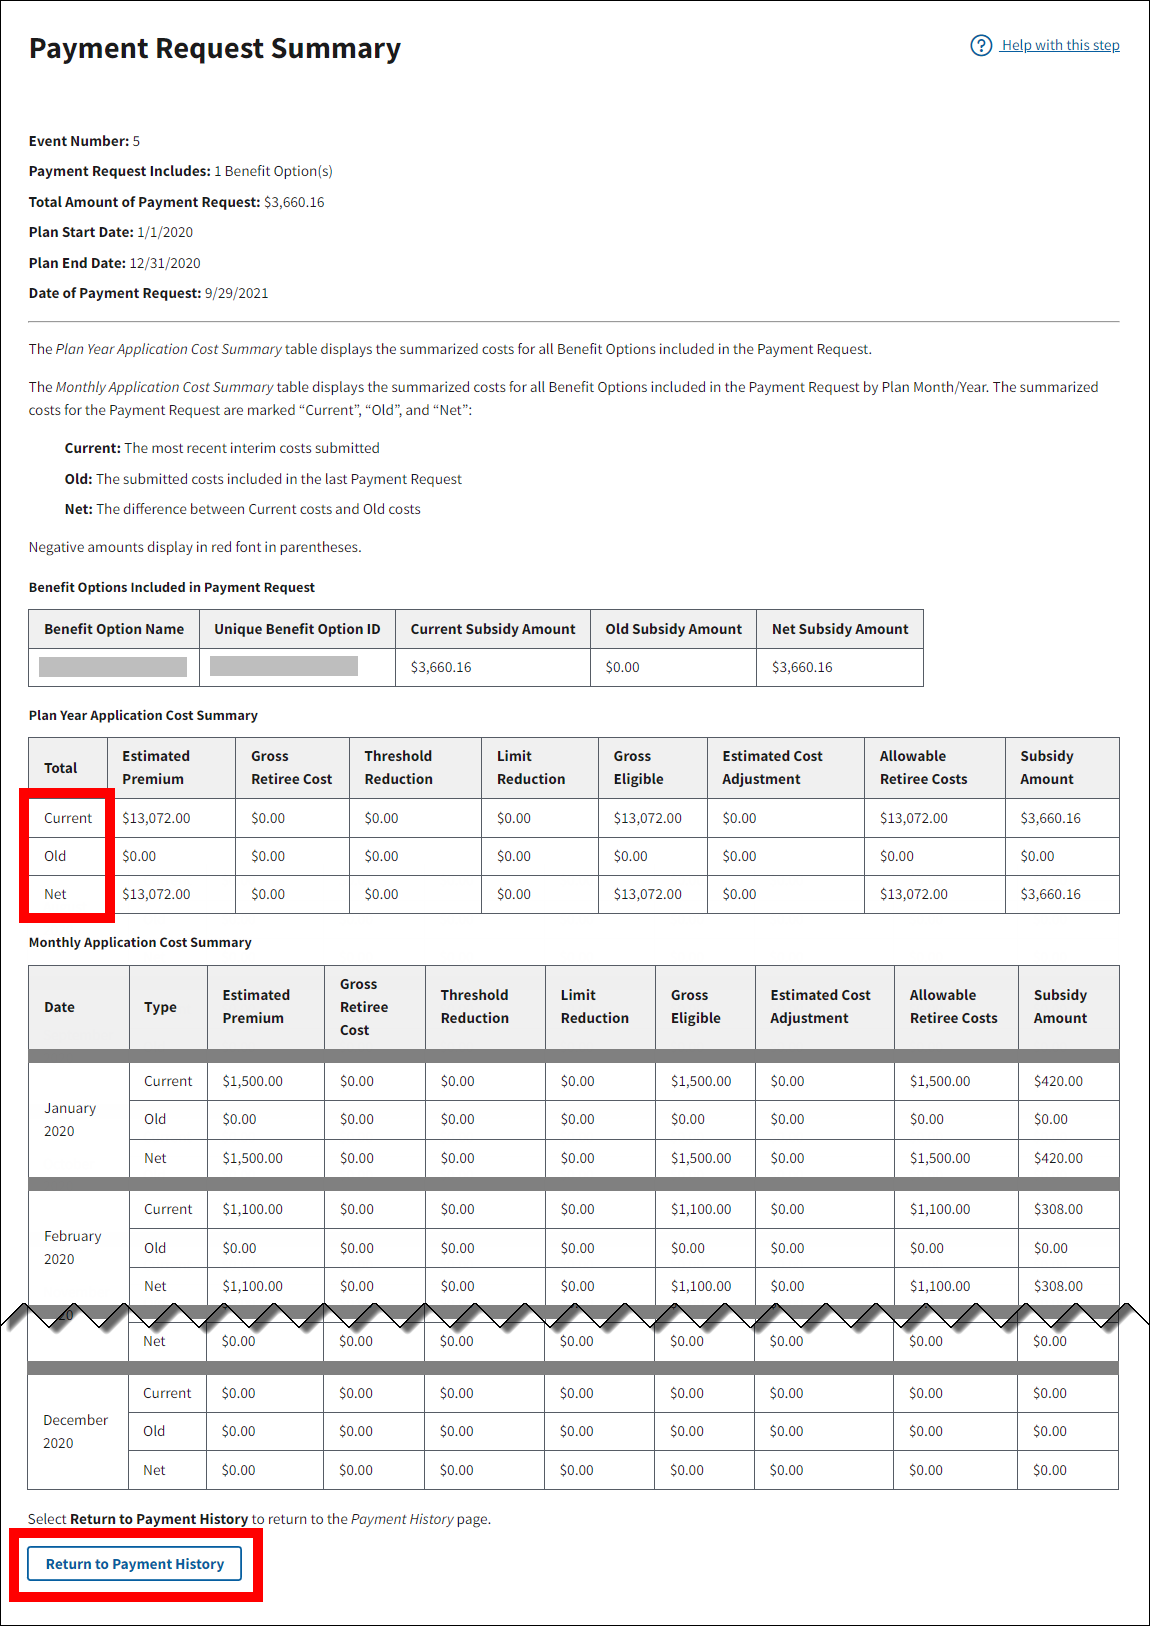 Payment Request Summary page with sample data. Plan Year Application Cost Summary table Total column and Return to Payment History button are highlighted.